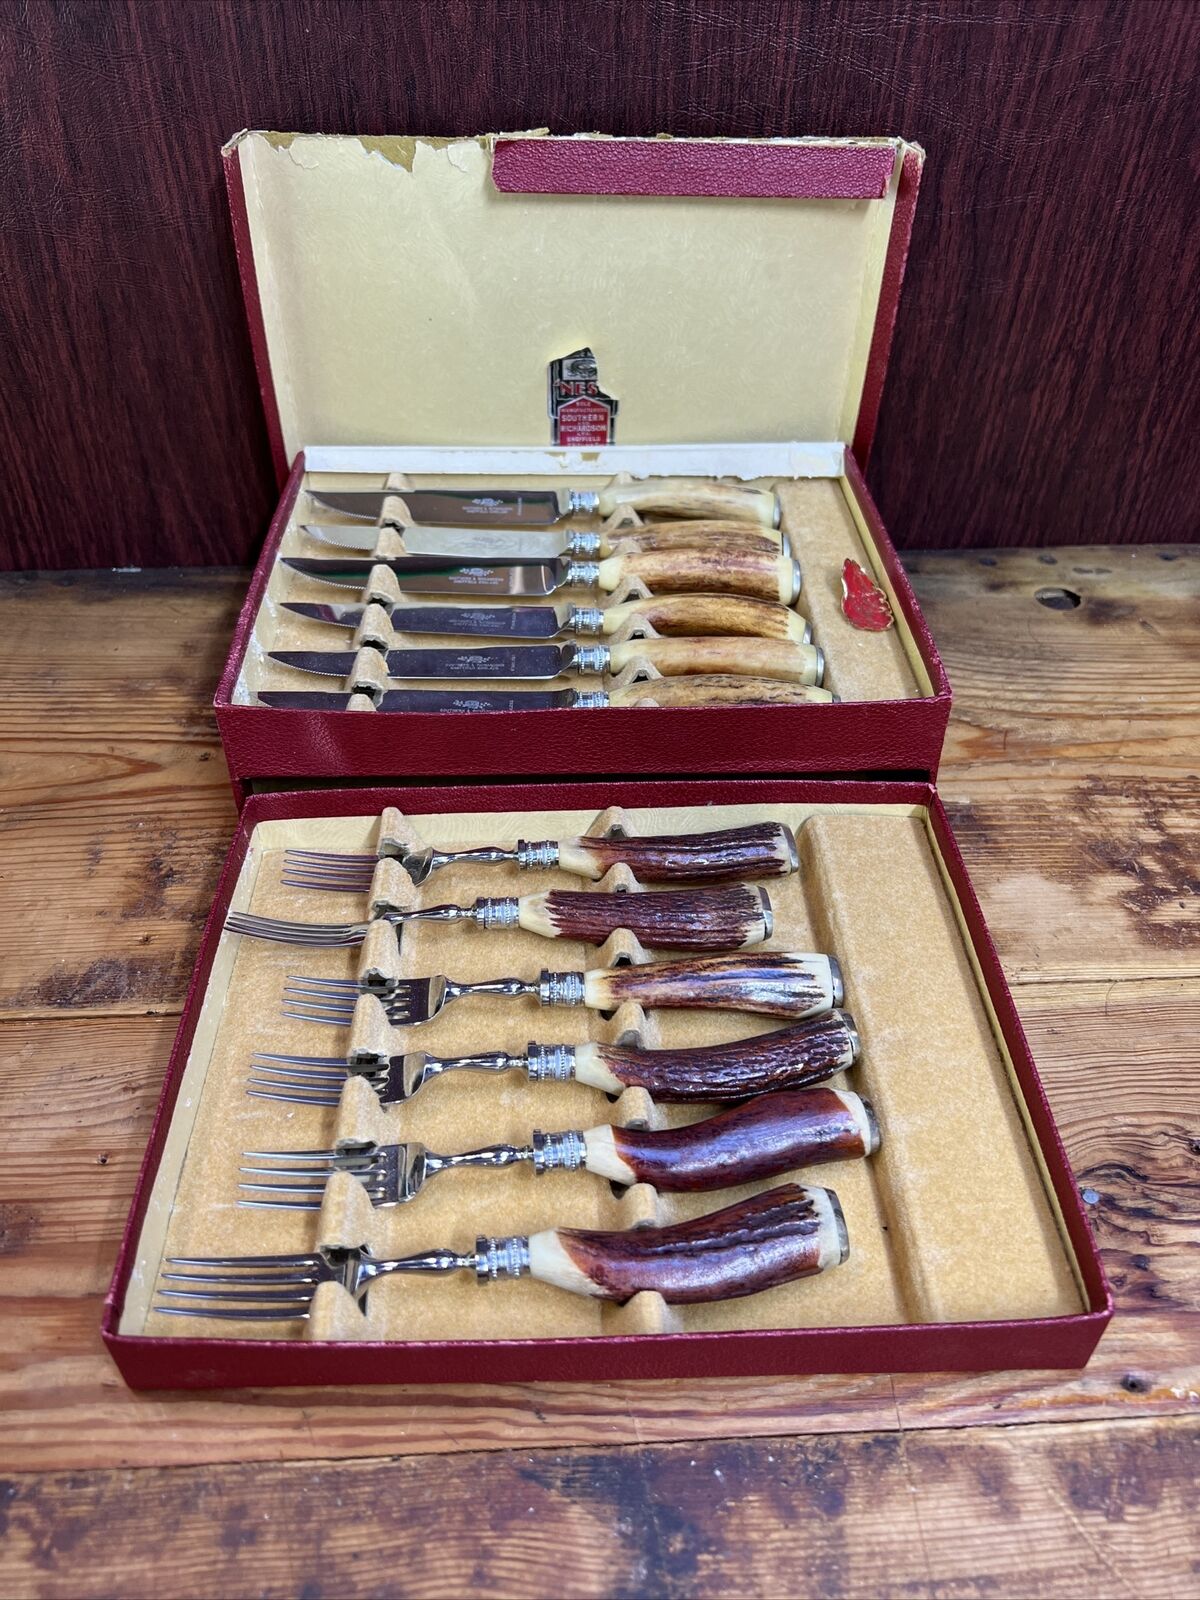 12 Piece Richardson Sheffield England fork and knives